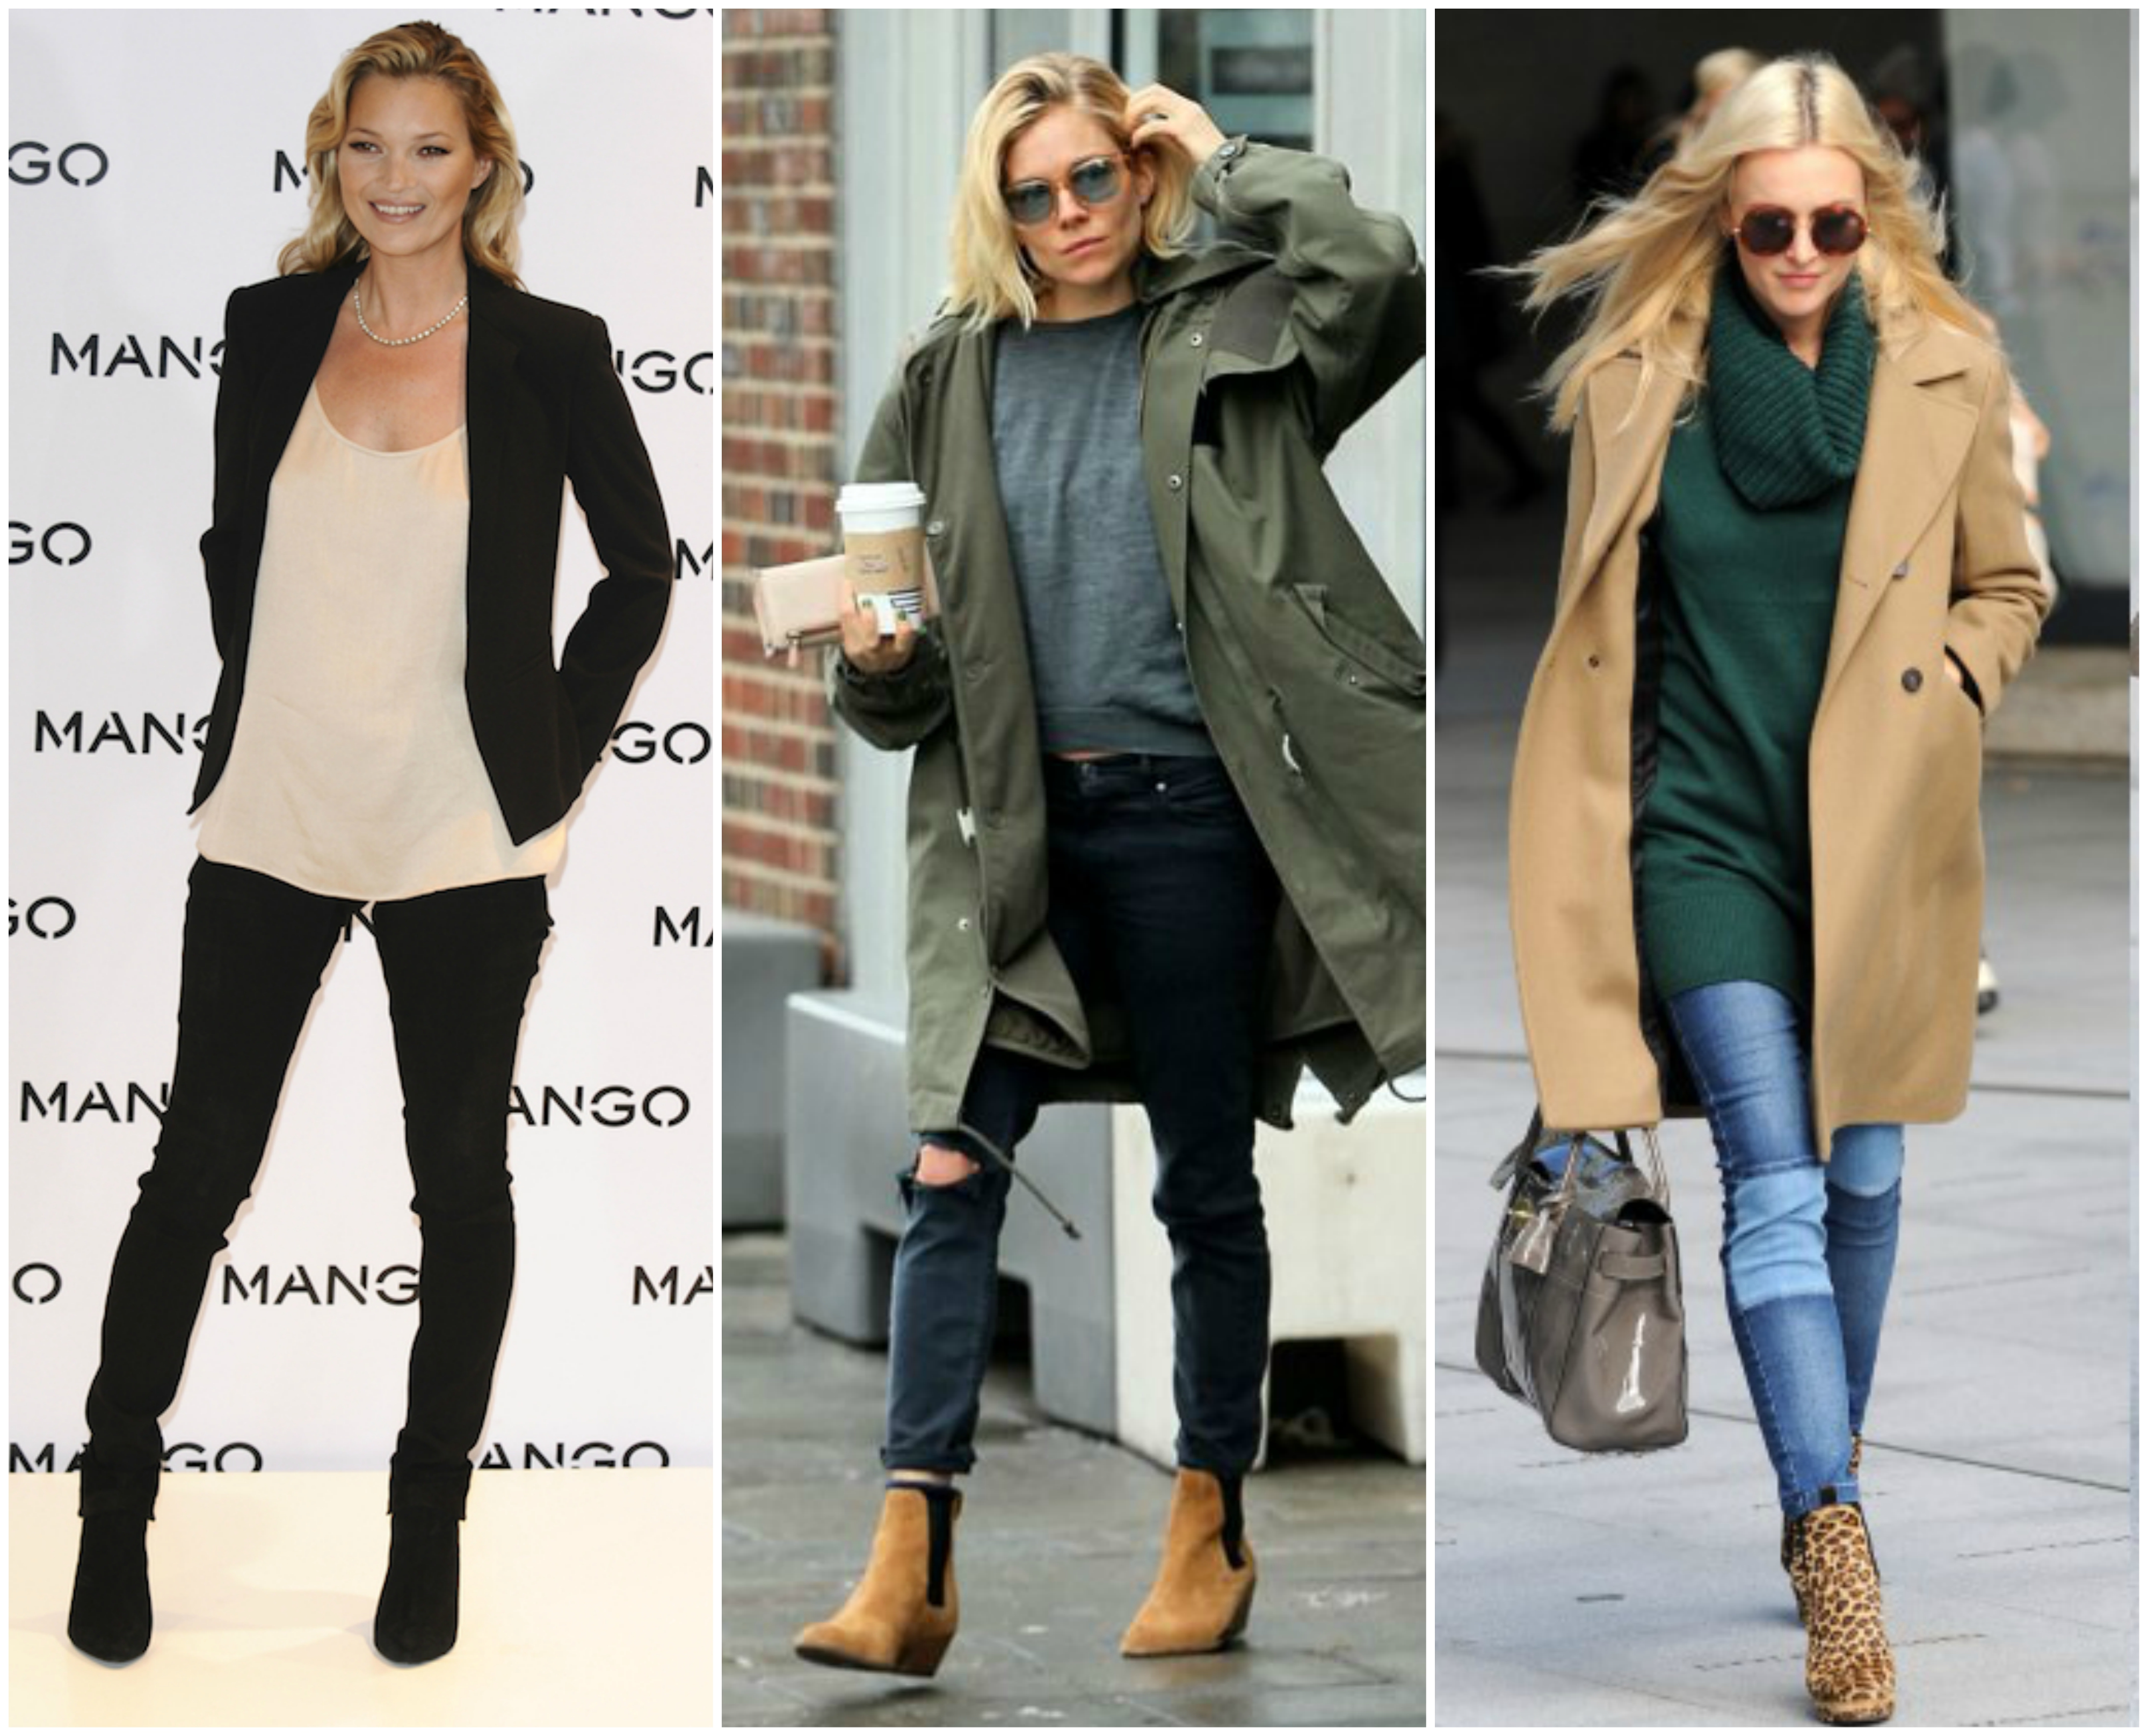 Kate Moss, Sienna Miller and Fearne Cotton demonstrate how to wear Chelsea boots during the day